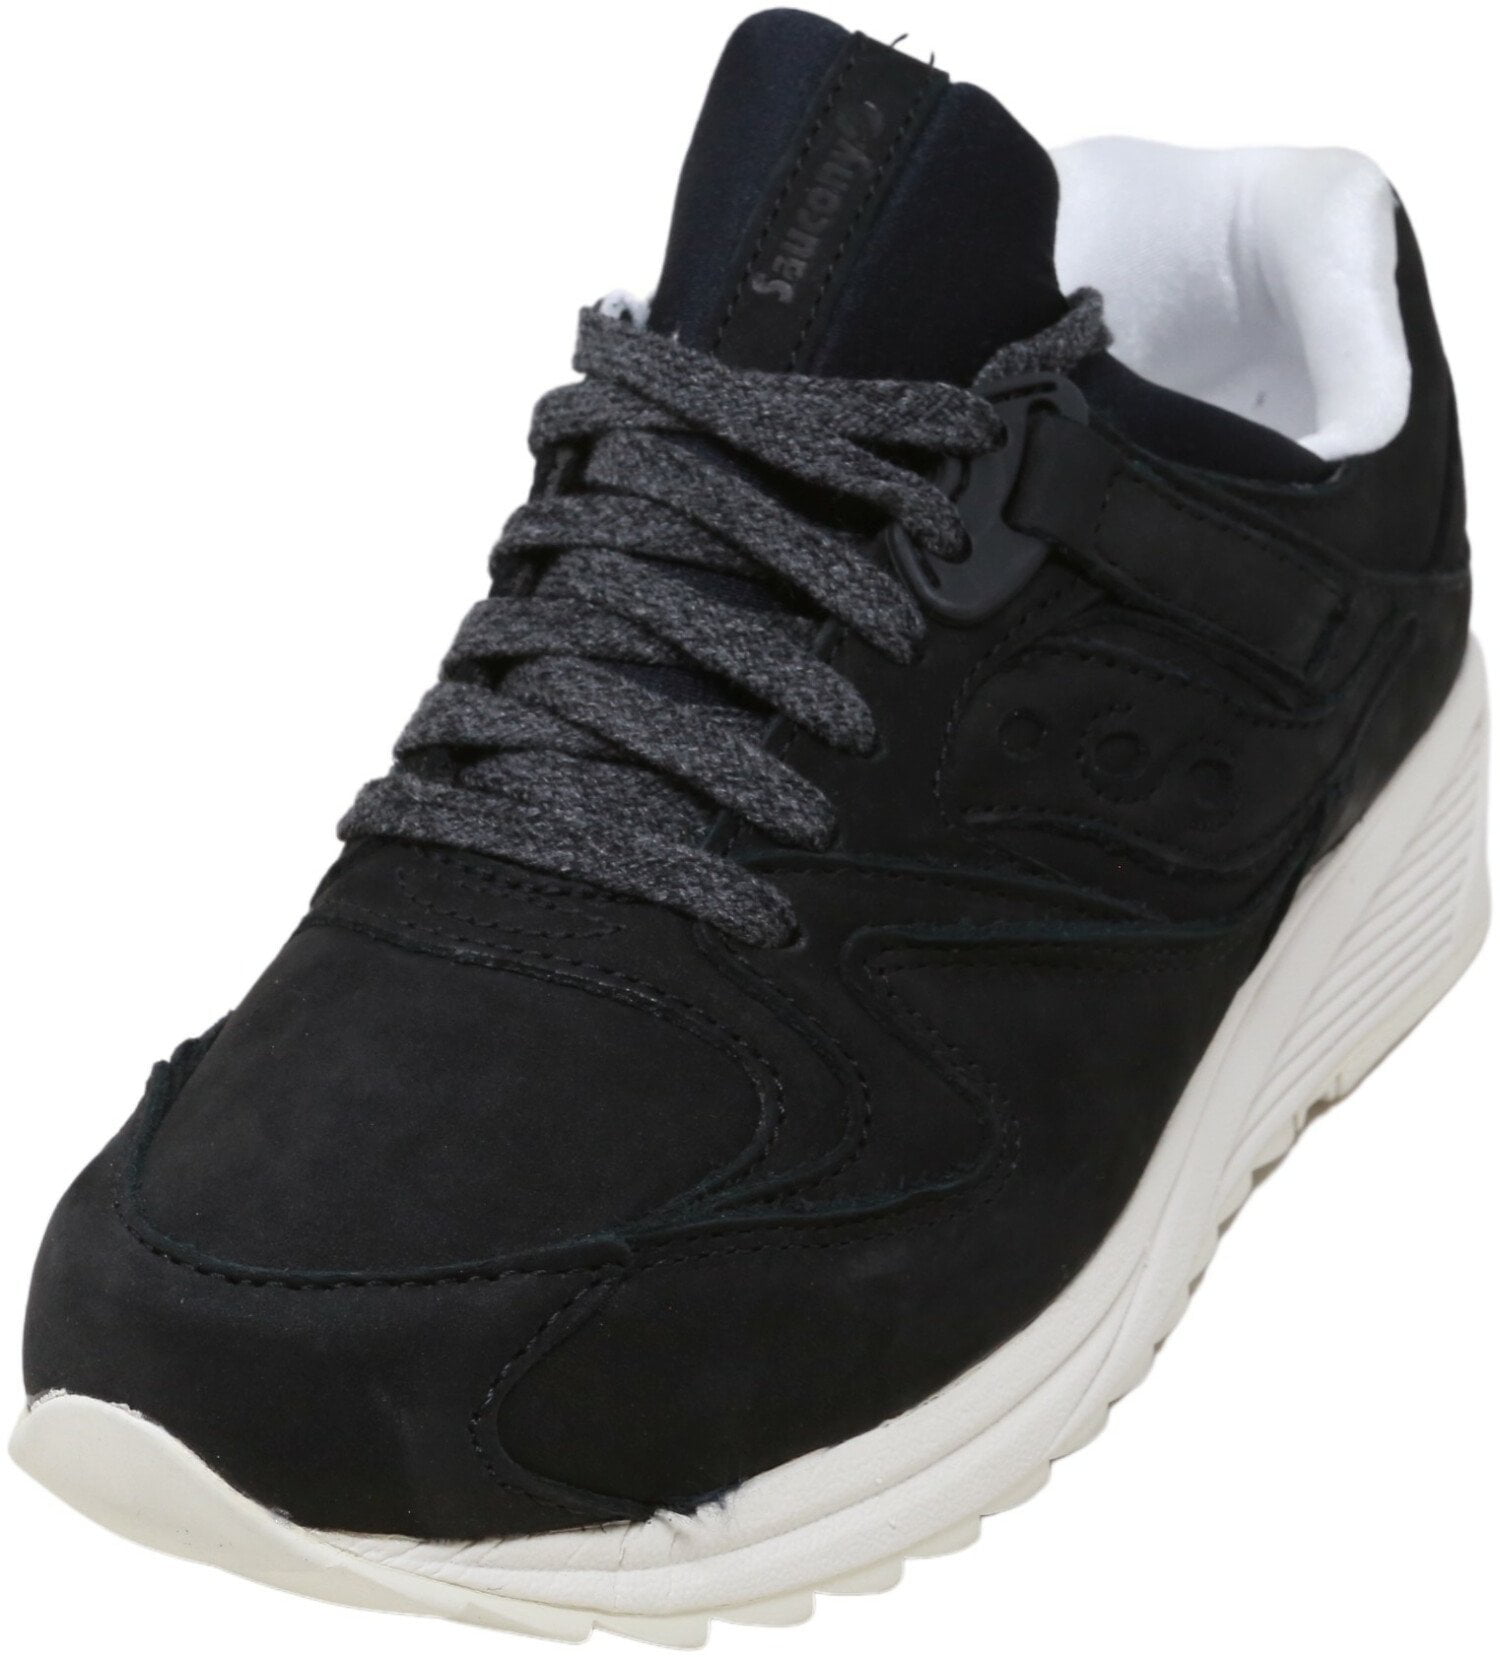 Saucony Men's Grid 8500 Ht Black / White Ankle-High Leather 